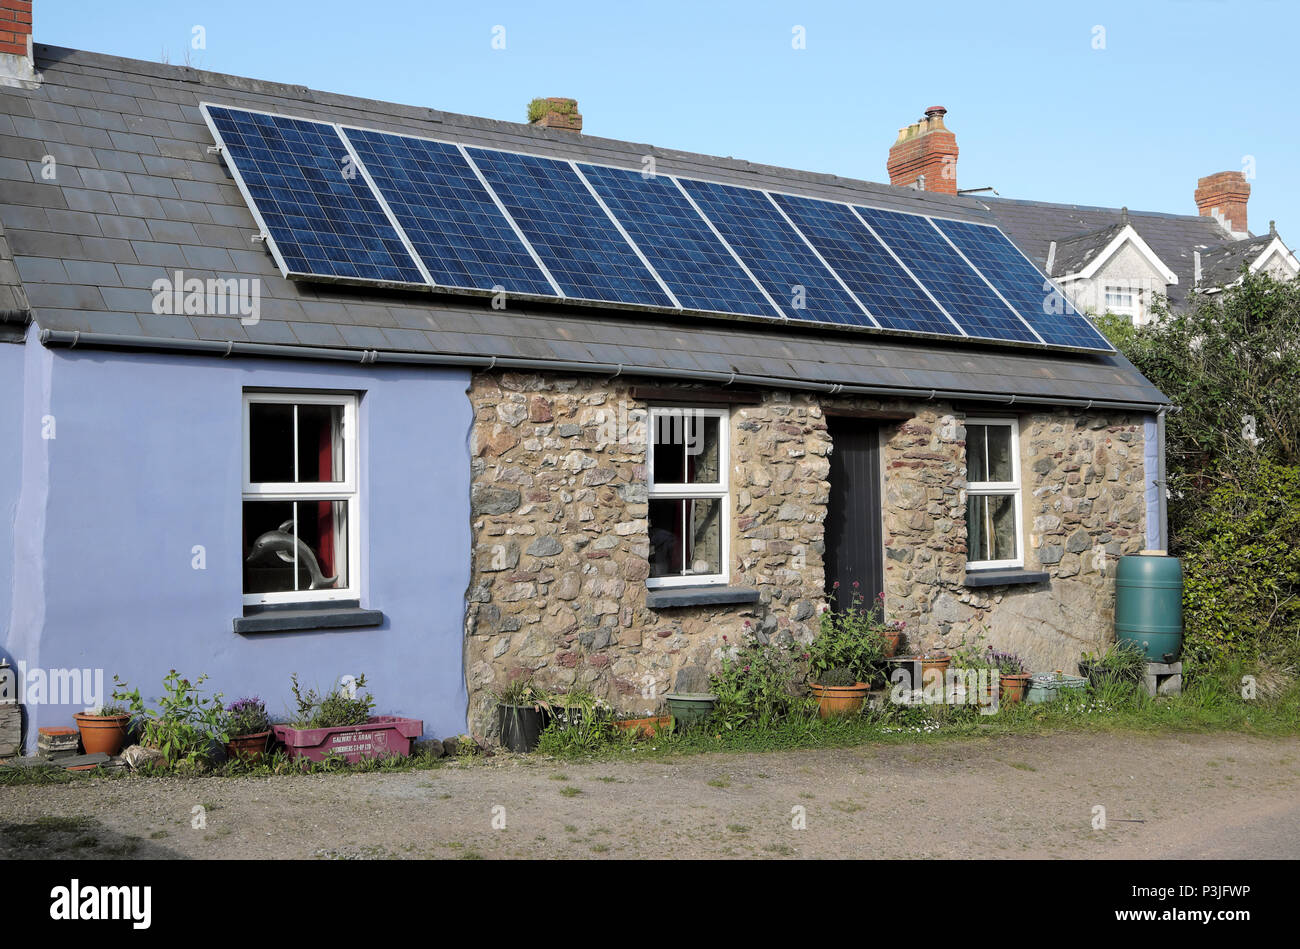 Photovoltaic cells solar panels panel on the roof of a small stone cottage house home in village of Marloes Pembrokeshire West Wales, UK  KATHY DEWITT Stock Photo